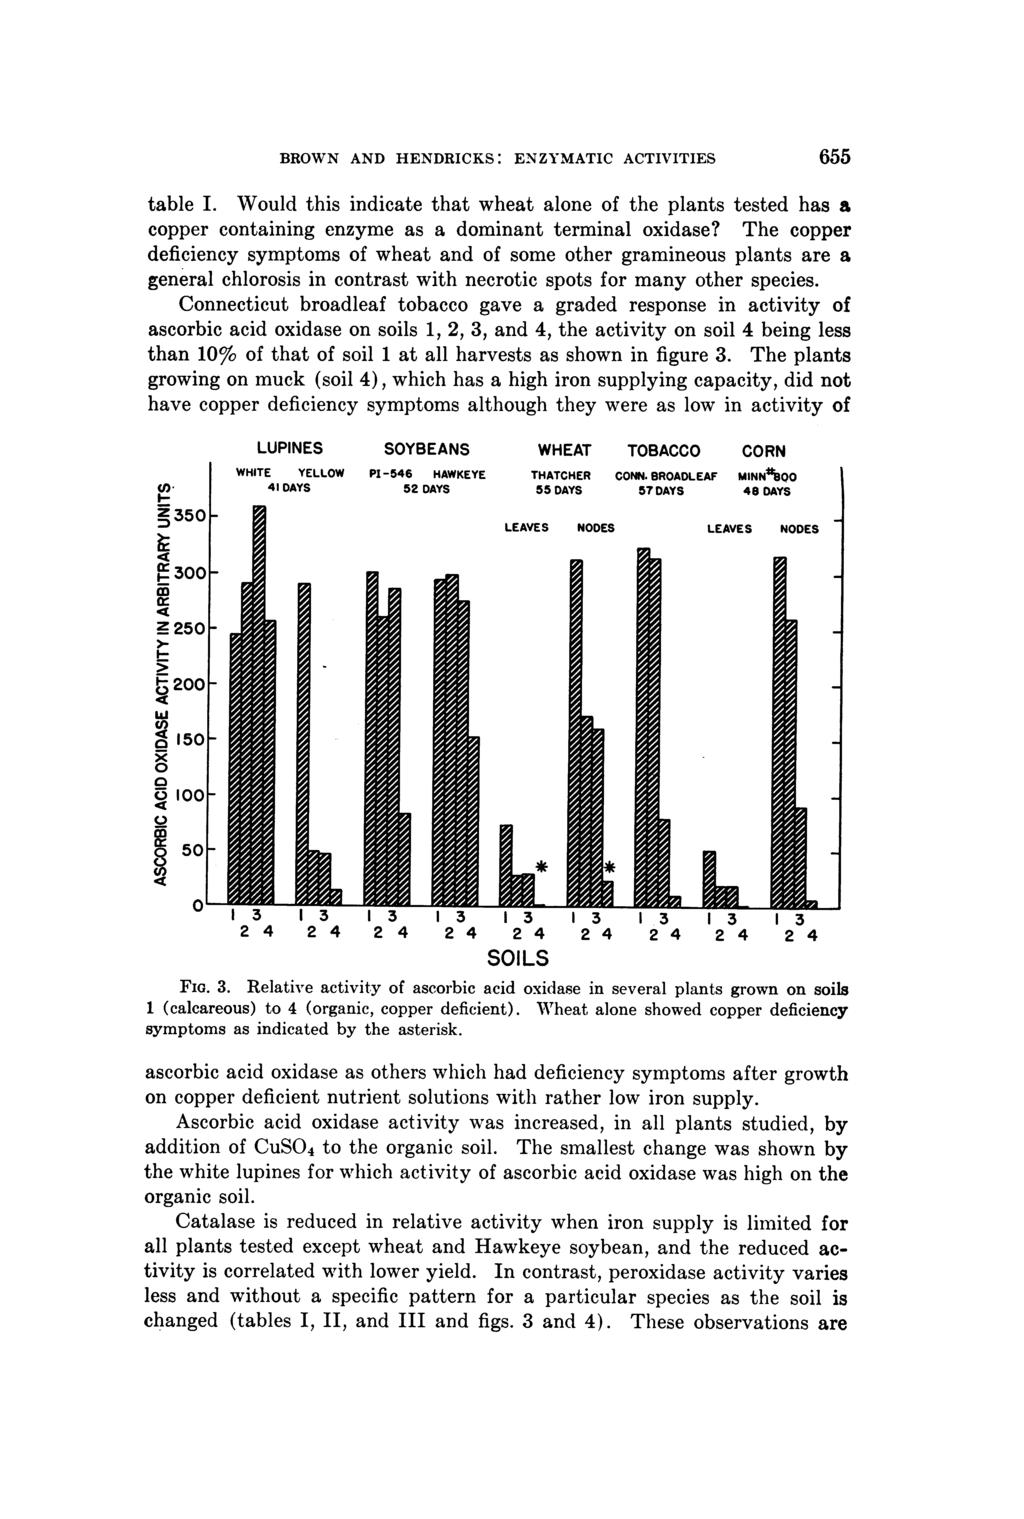 BROWN AND HENDRICKS: ENZYMATIC ACTIVITIES 655 table I. Would this indicate that wheat alone of the plants tested has a copper containing enzyme as a dominant terminal oxidase?